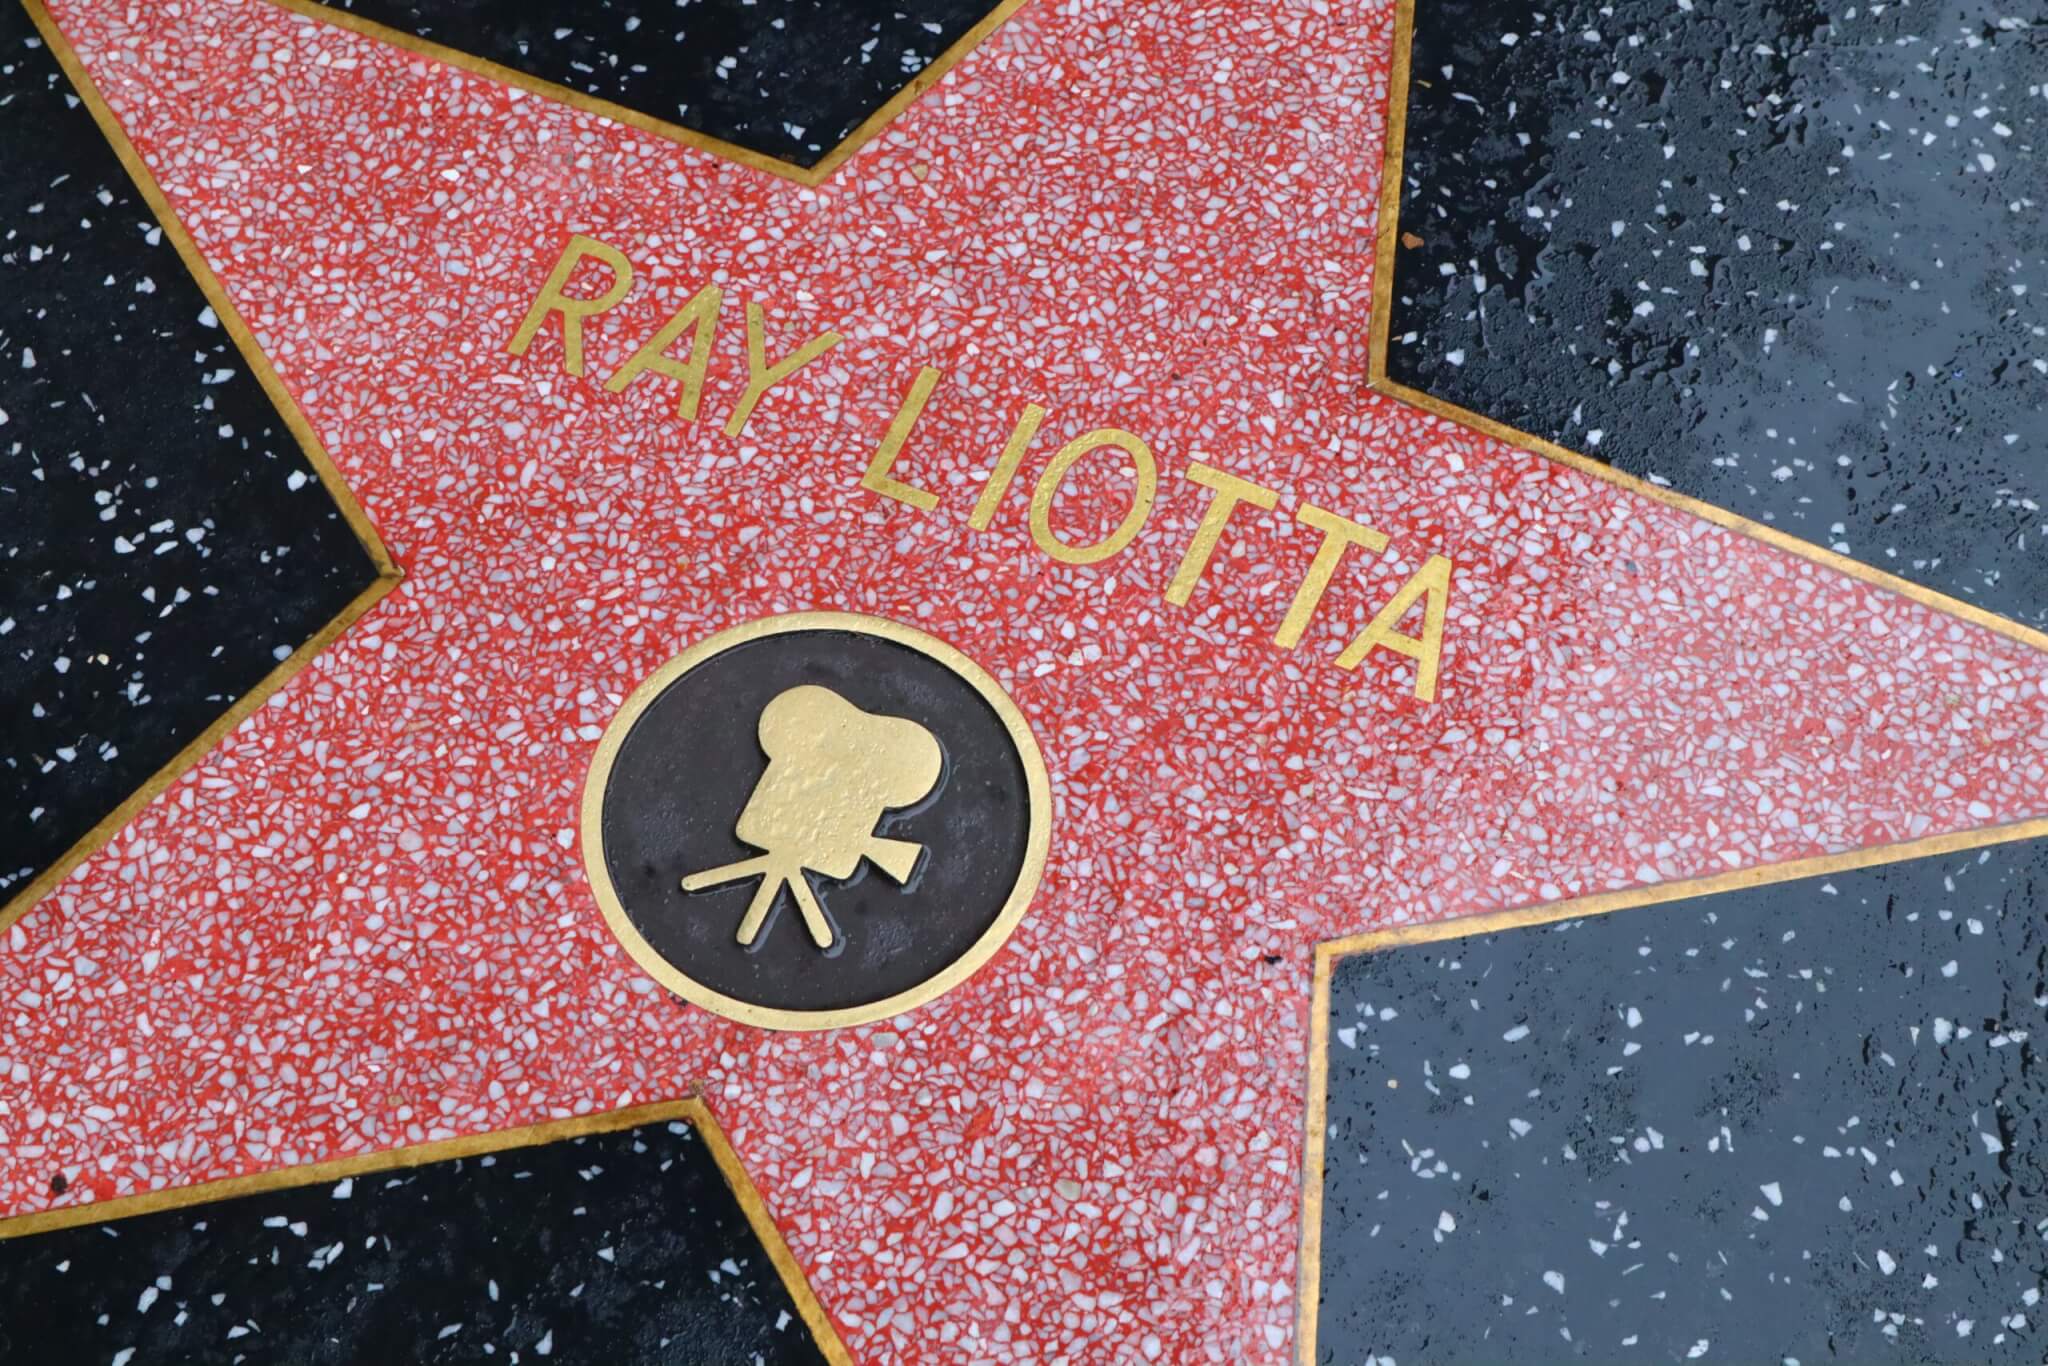 Ray Liotta's star on the Hollywood Walk of Fame